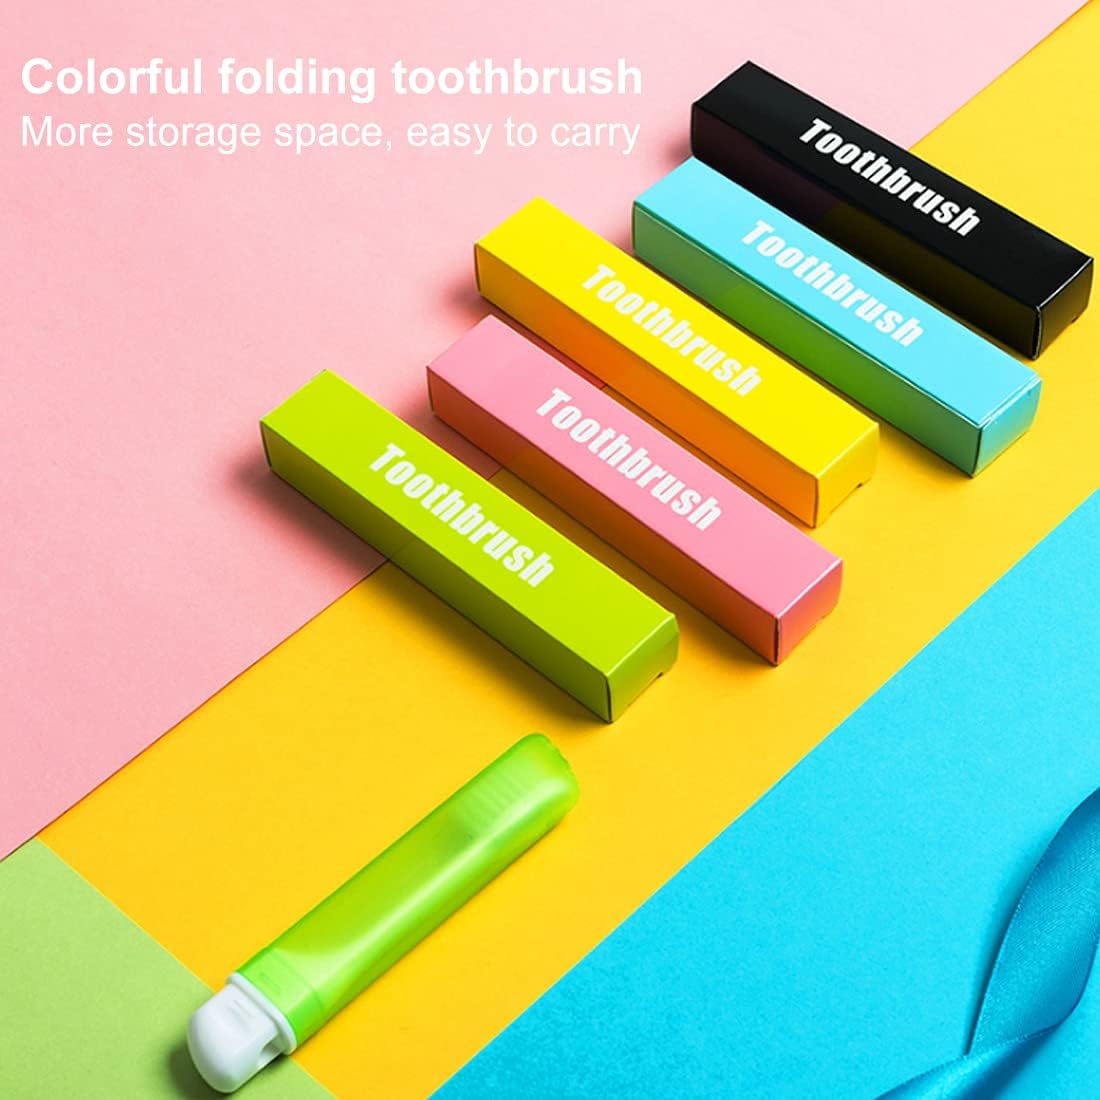 Showcasing a Green Color Foldable Toothbrush in a folded form along with the boxes of all color variants 